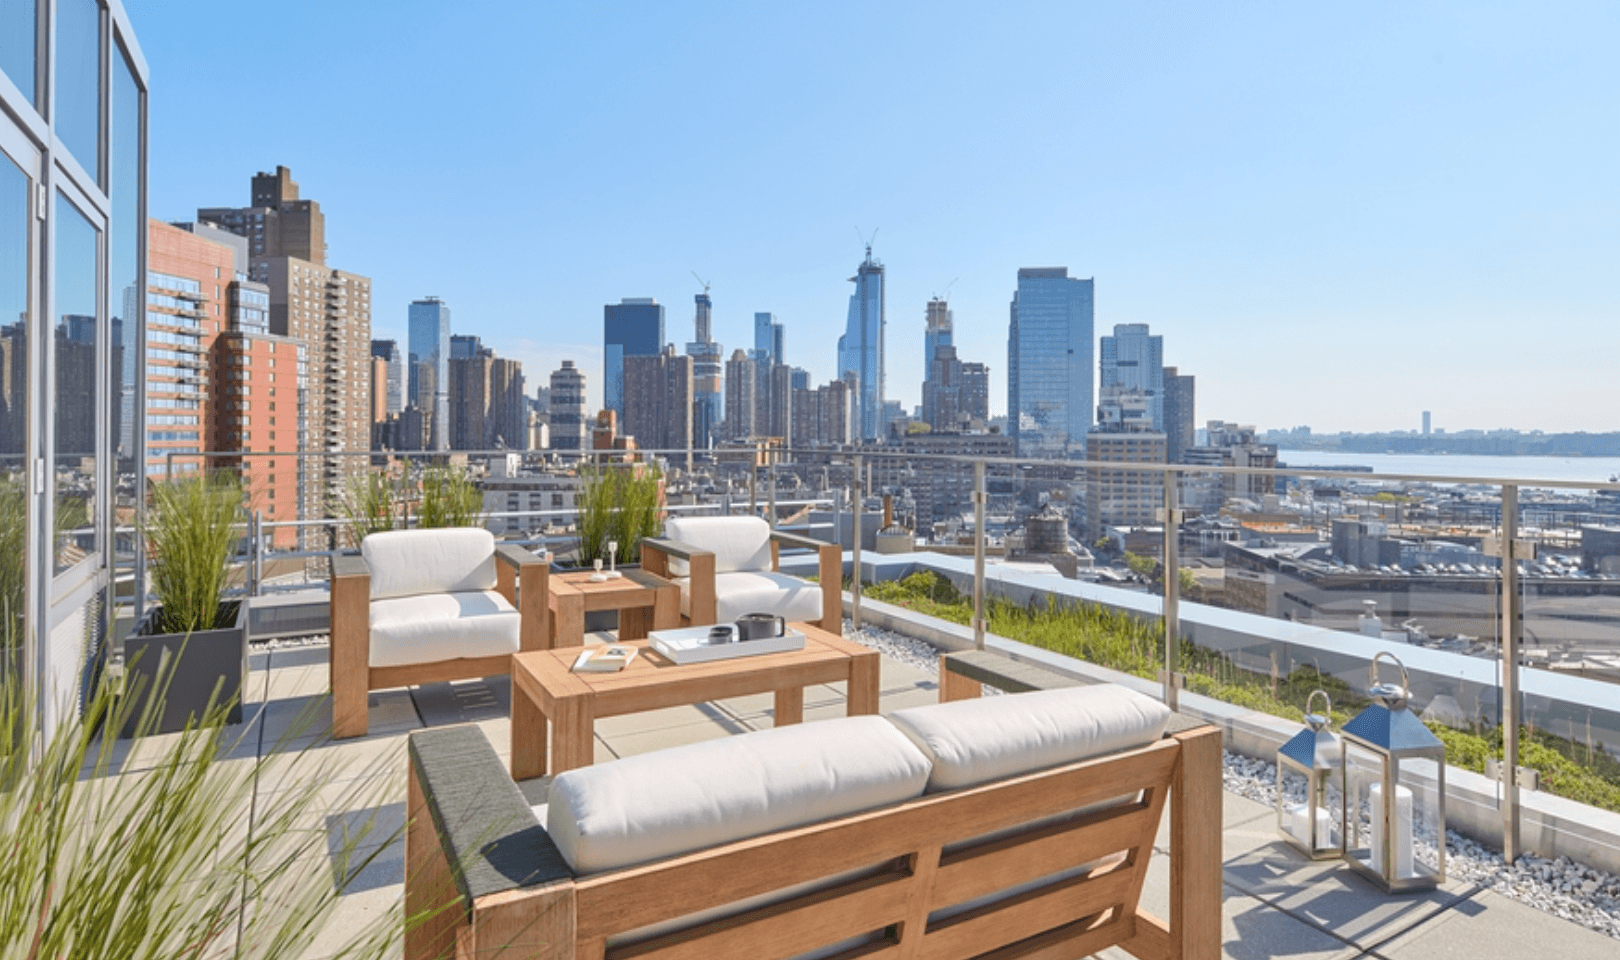 2 Beds/2 Bath in Luxury Amenity Filled Hell’s Kitchen Building, W/D in Unit and Private Terrace!!!